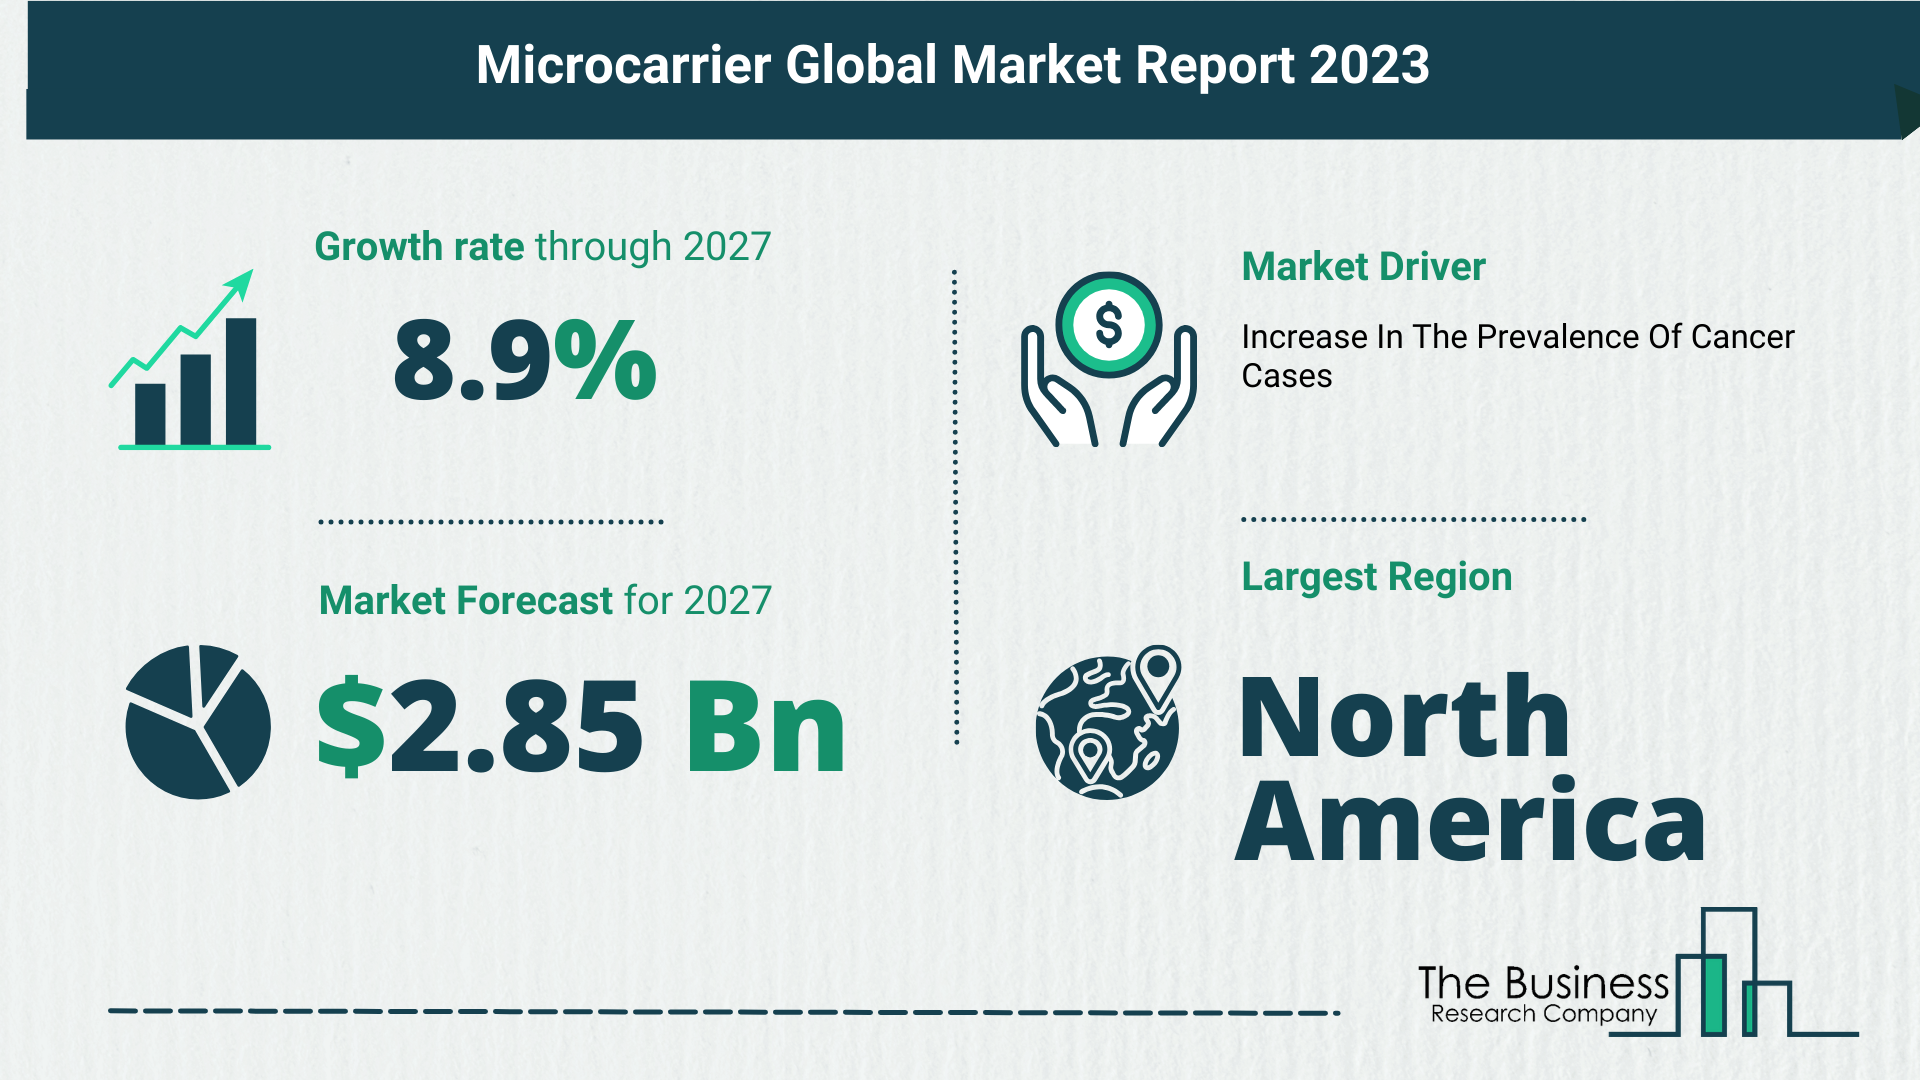 Key Trends And Drivers In The Microcarrier Market 2023